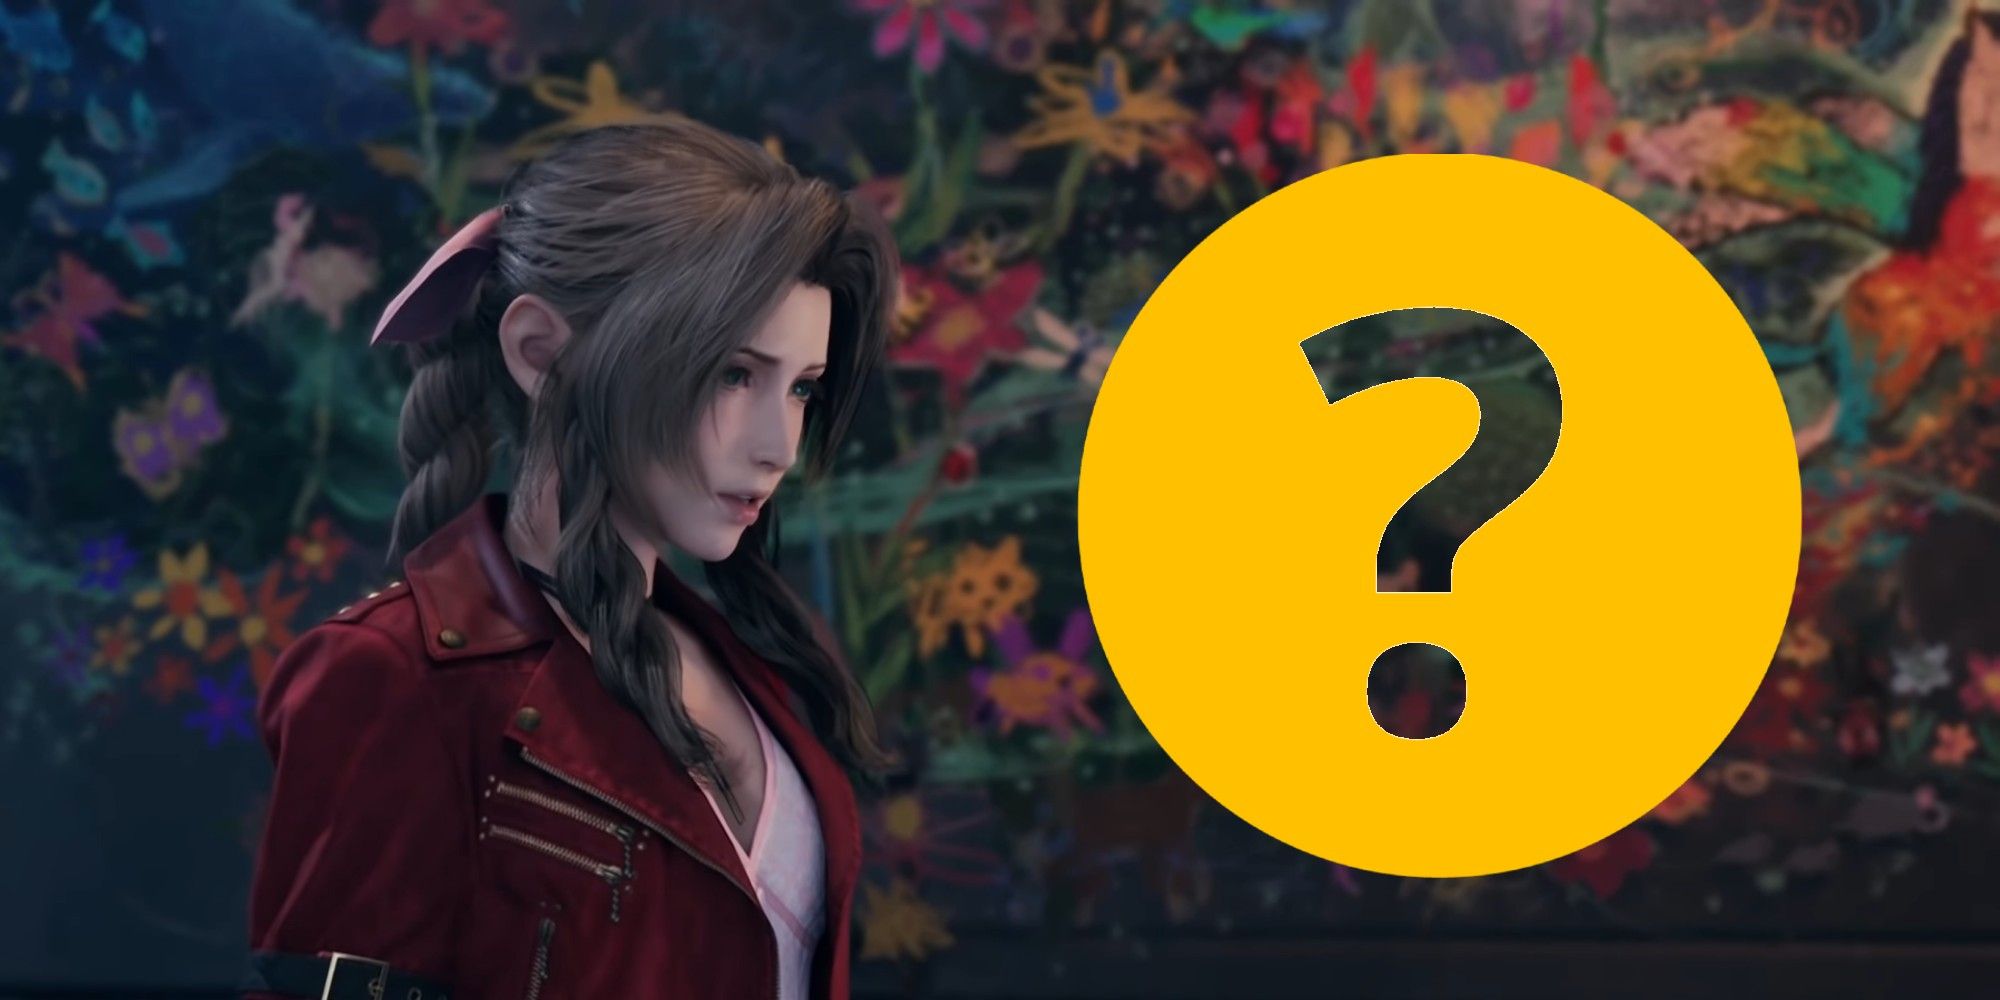 FF7 Remake Aerith Mural Explained